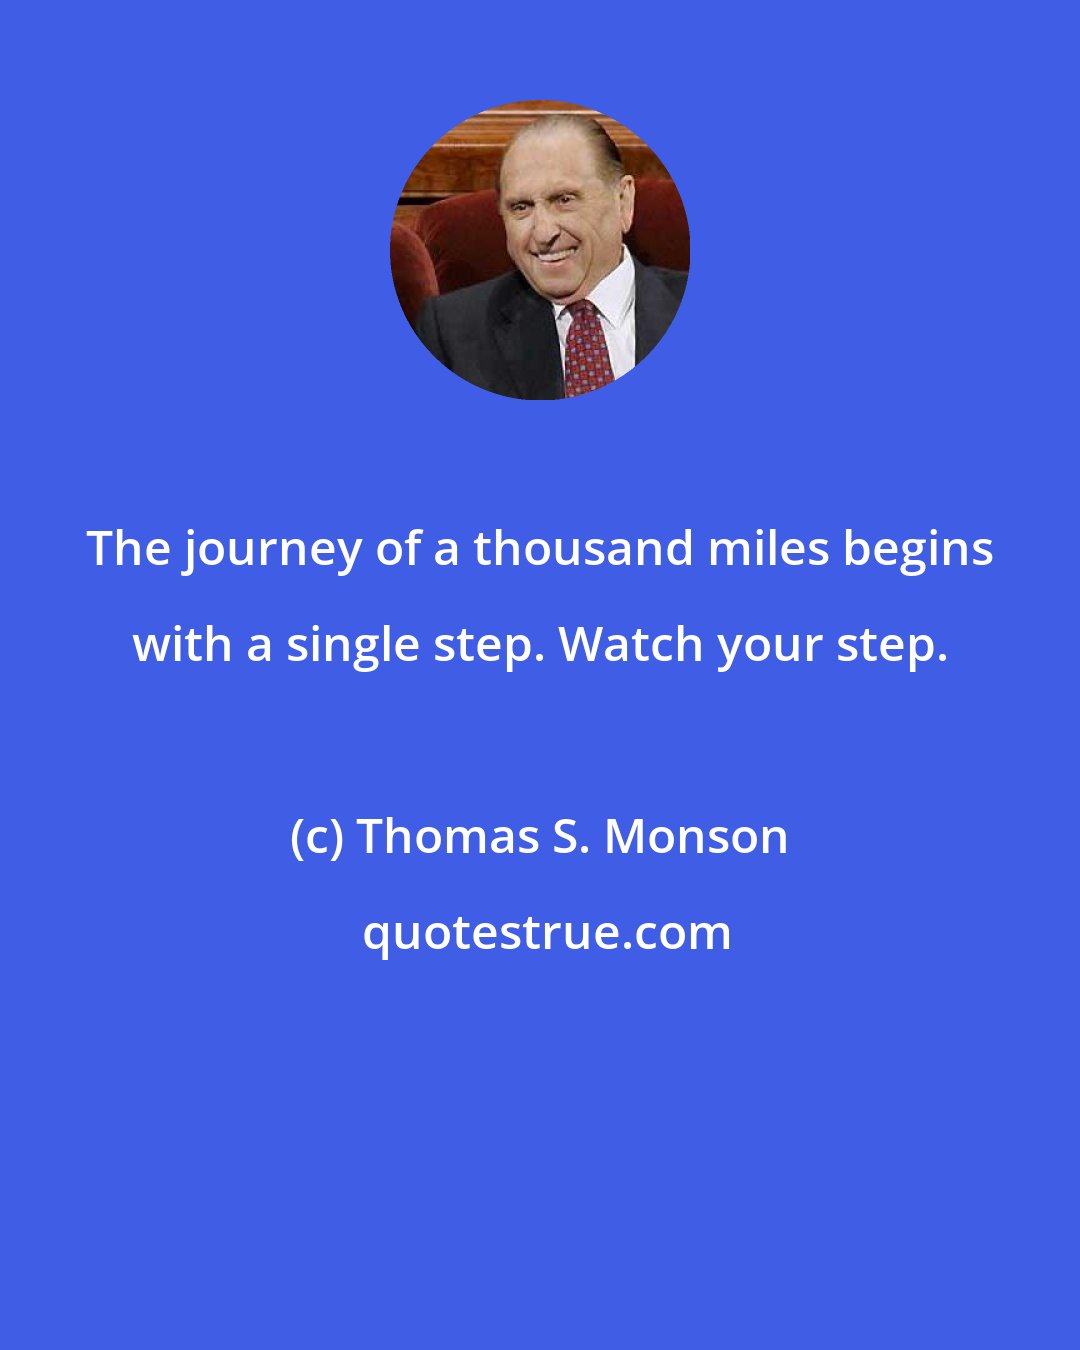 Thomas S. Monson: The journey of a thousand miles begins with a single step. Watch your step.